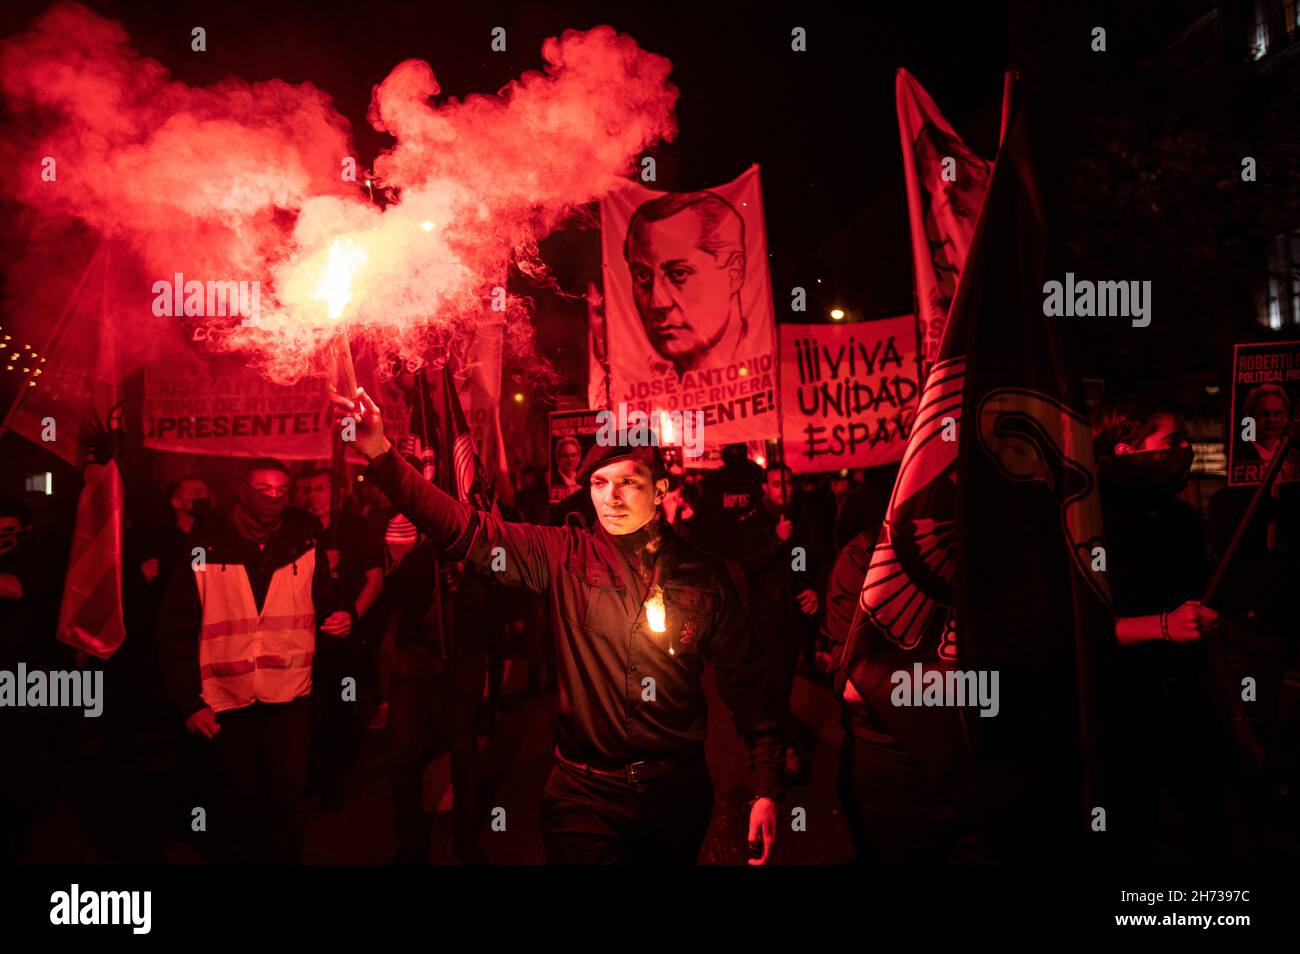 Madrid, Spain. 19th Nov, 2021. Far right wing members and supporters of La Falange carrying banners and flares during a demonstration for the anniversary of the death of Jose Antonio Primo de Rivera, founder of La Falange, commemorating the 85th anniversary of his death on 20 November 1936, shot at the beginning of the Spanish Civil War. Credit: Marcos del Mazo/Alamy Live News Stock Photo